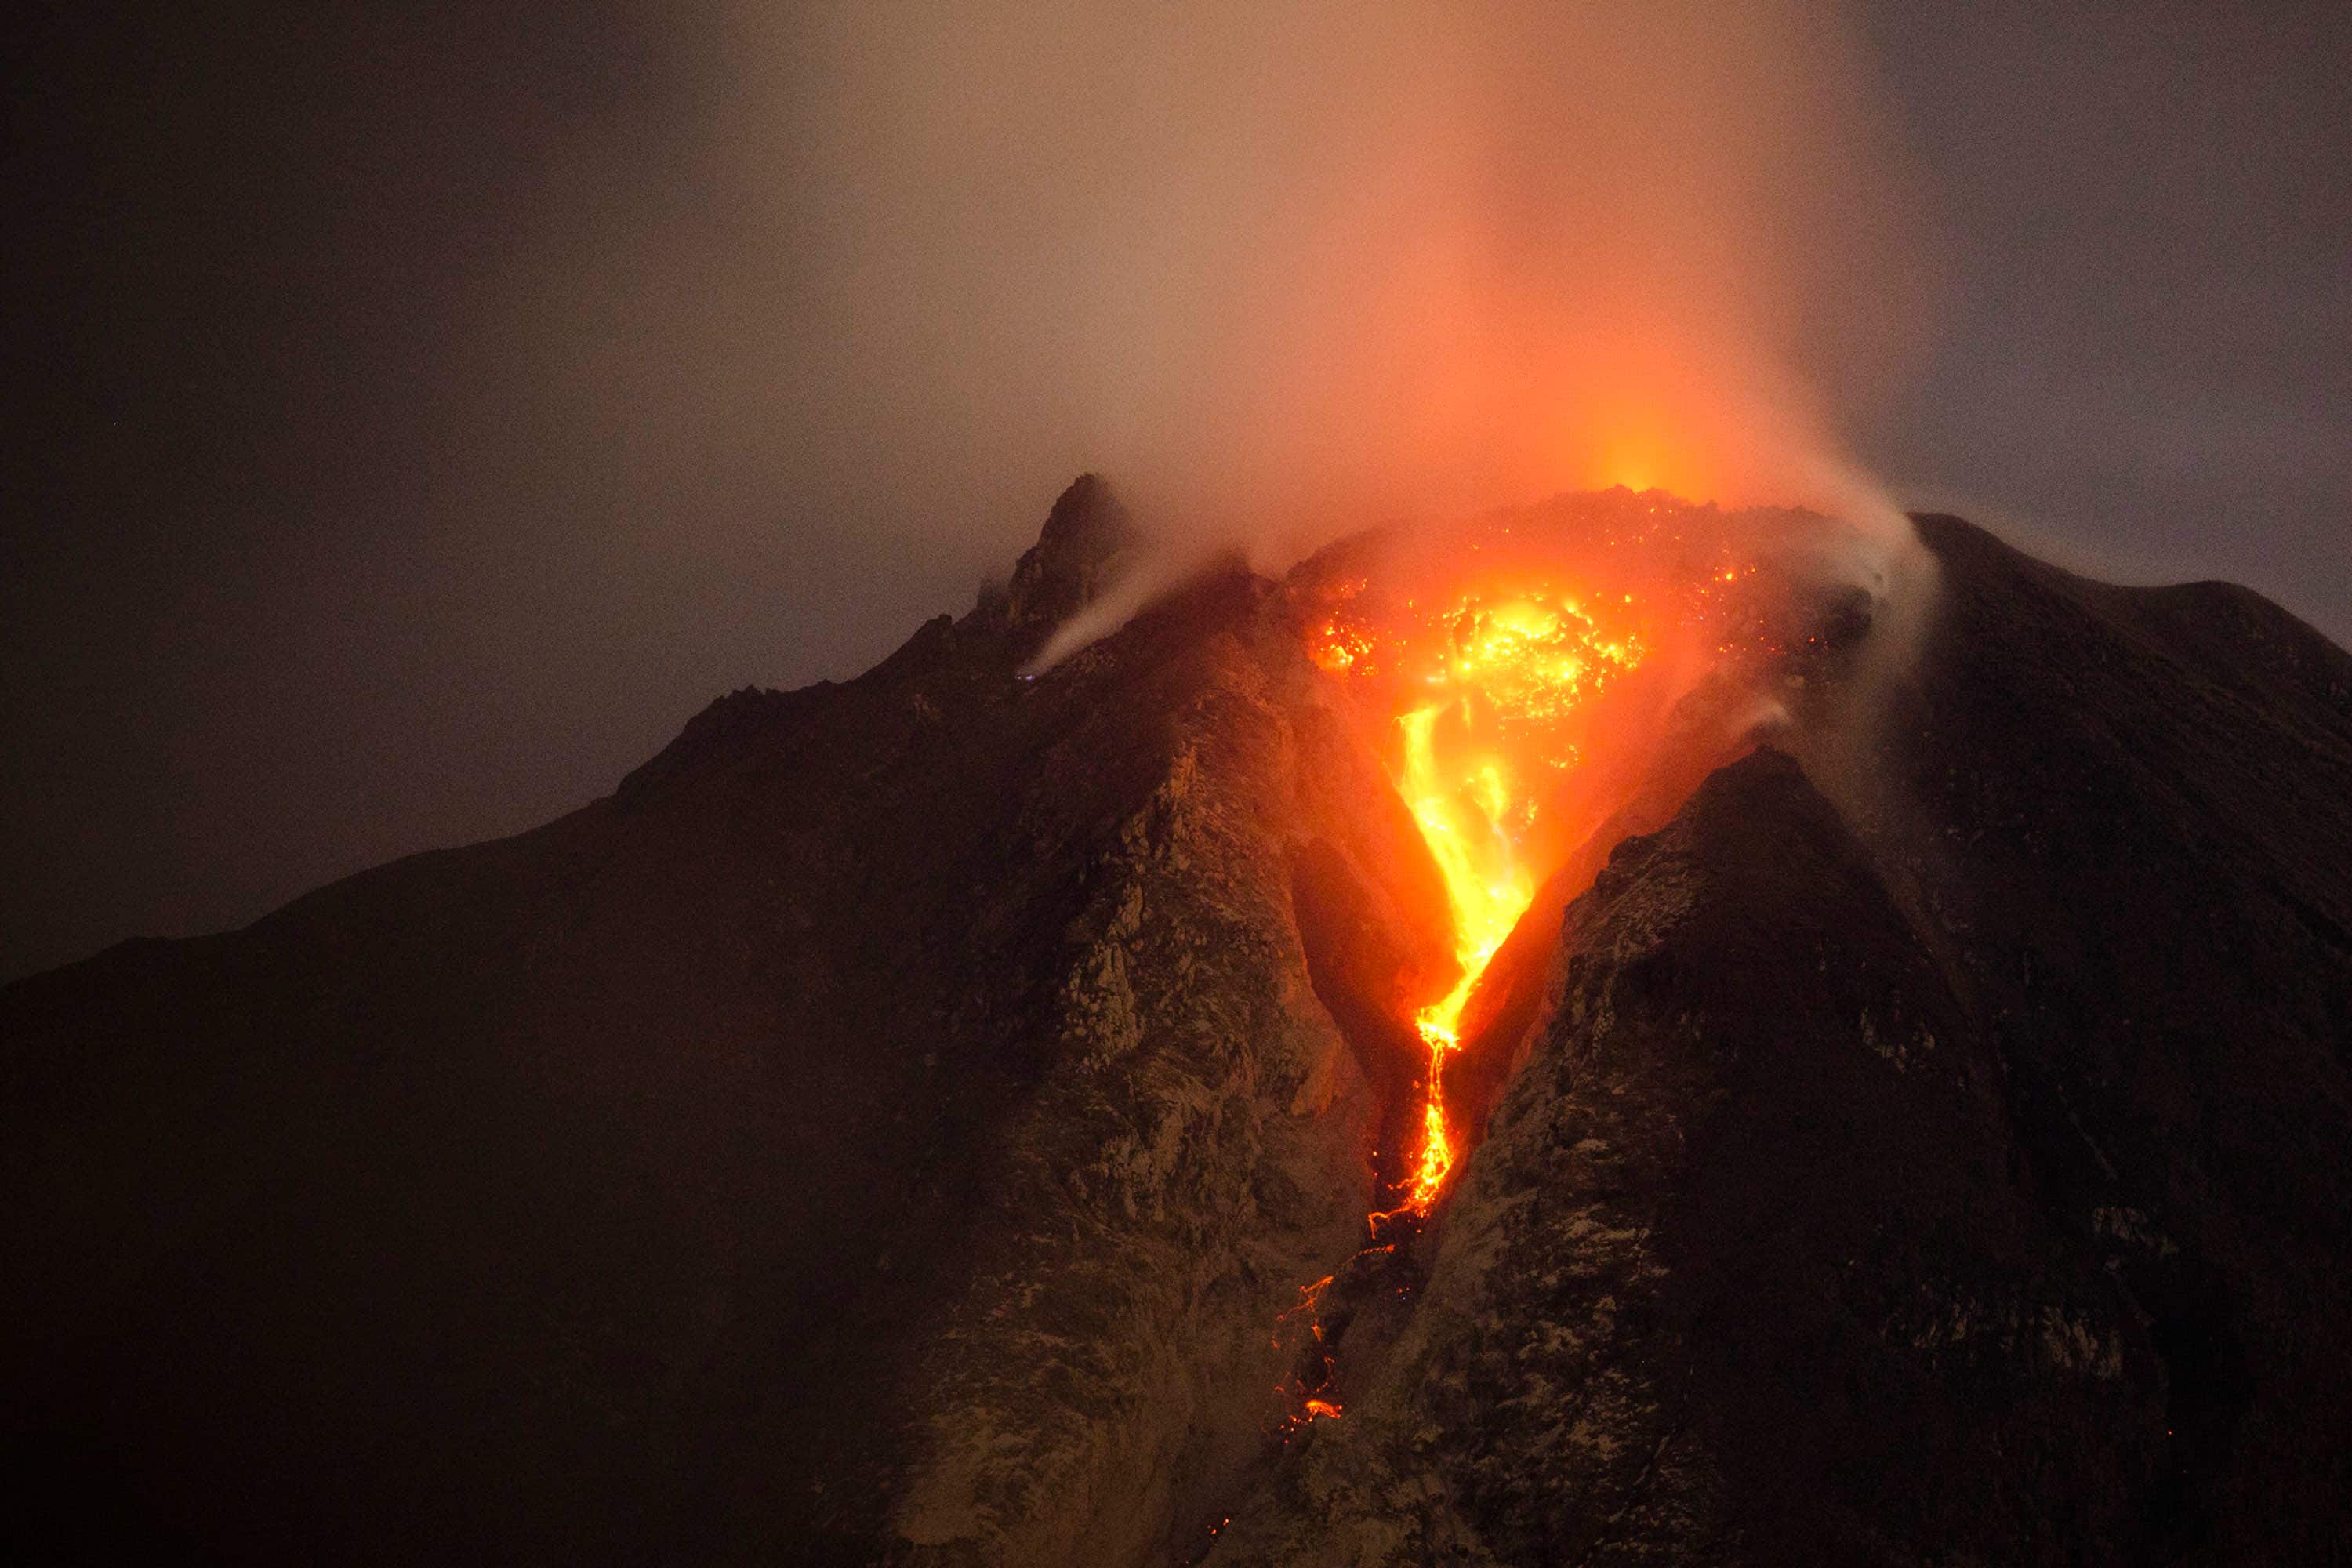 Monte Sinabung, Indonesia